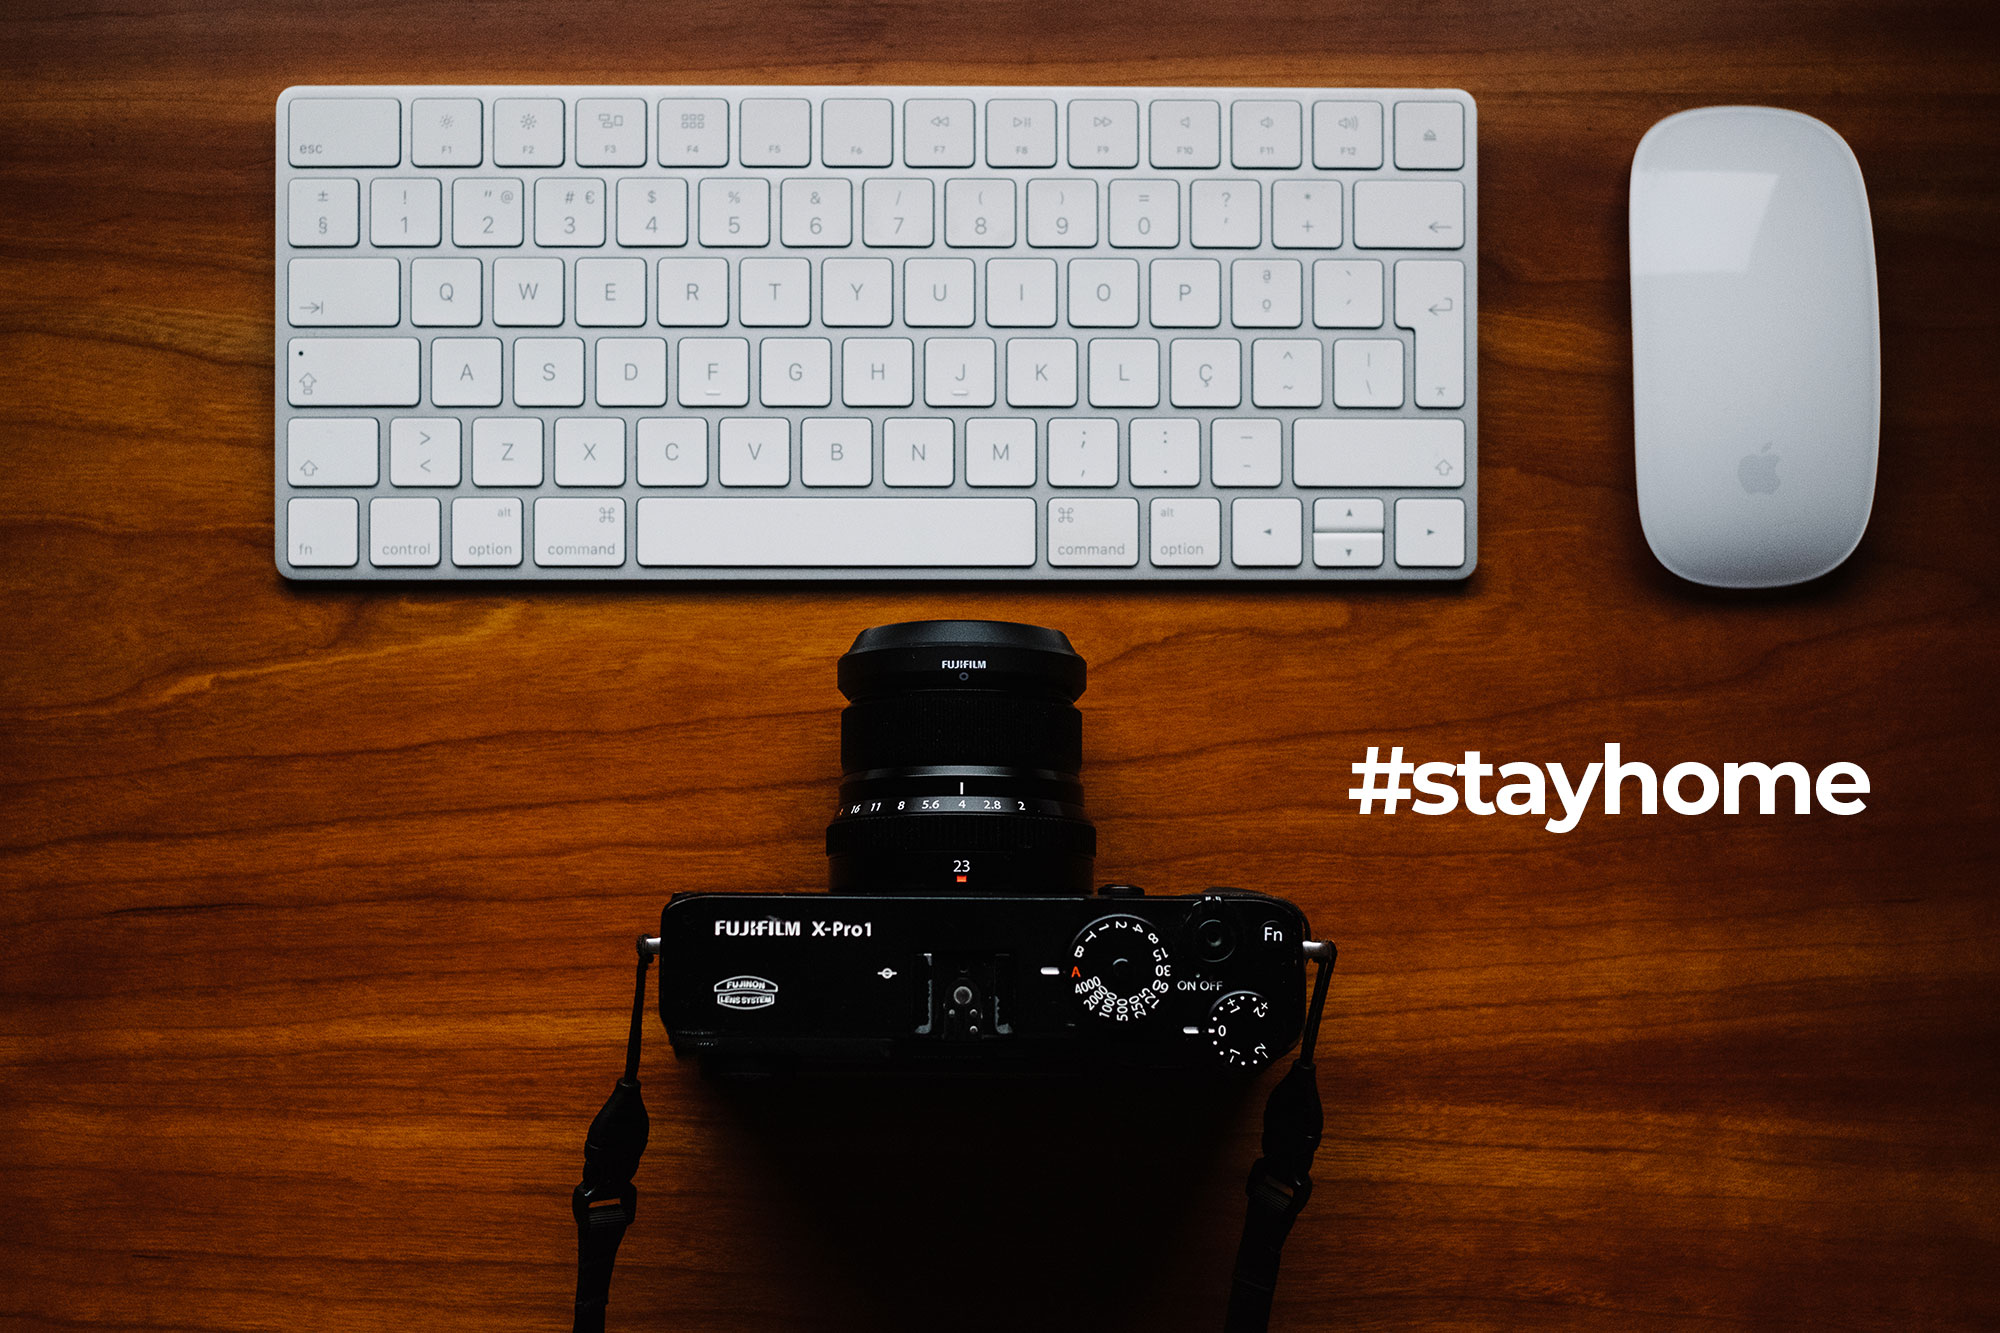 #StayHome with your Fuji – Submit your photos